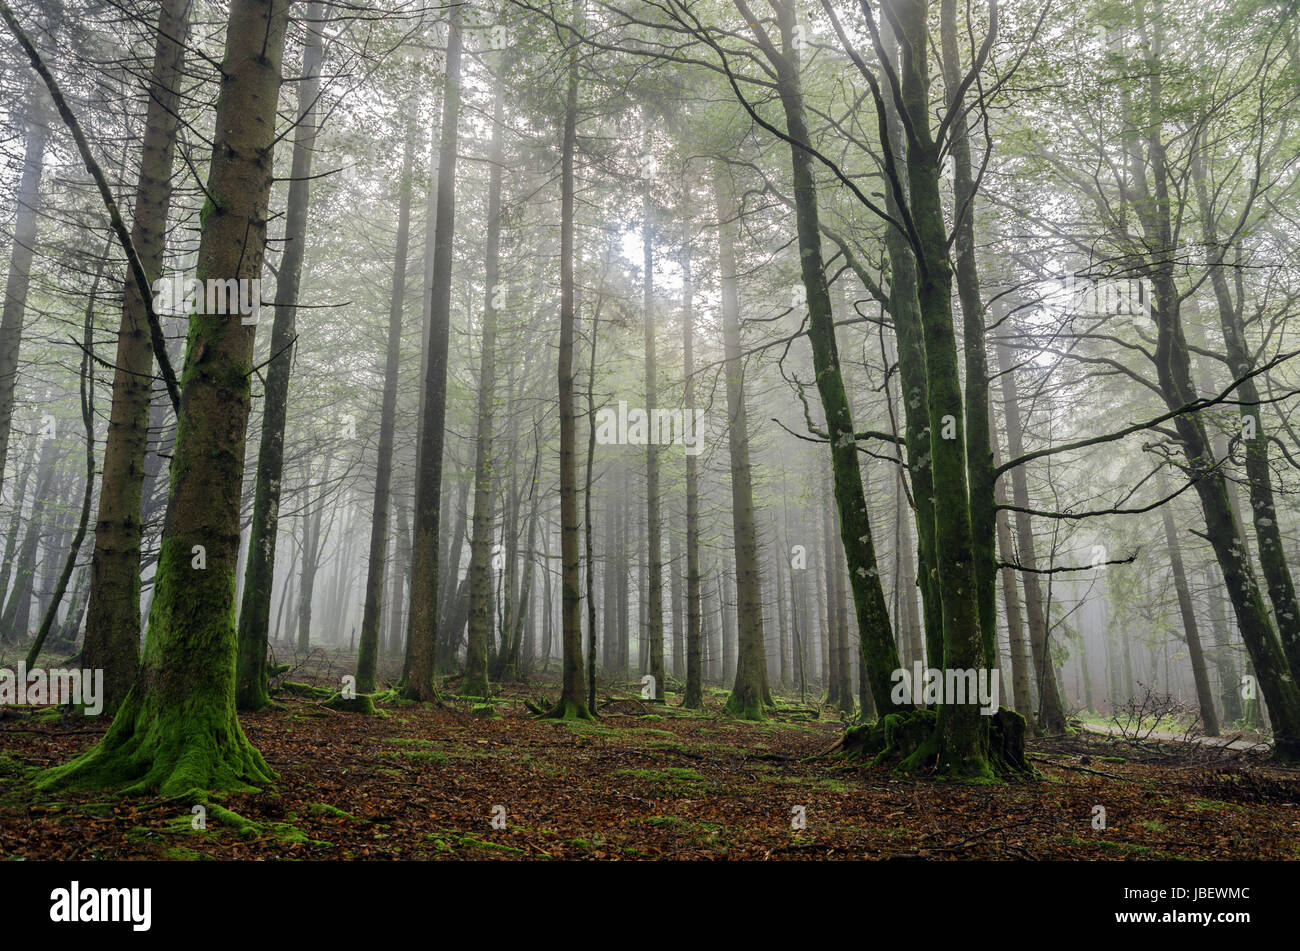 Beautiful nature photography inside the fores in Spain. The fog is adding mysticle atmosphere in this otherwhise boring forest, beautiful sun rays are cutting the fog and make the picture more dramatic. Stock Photo